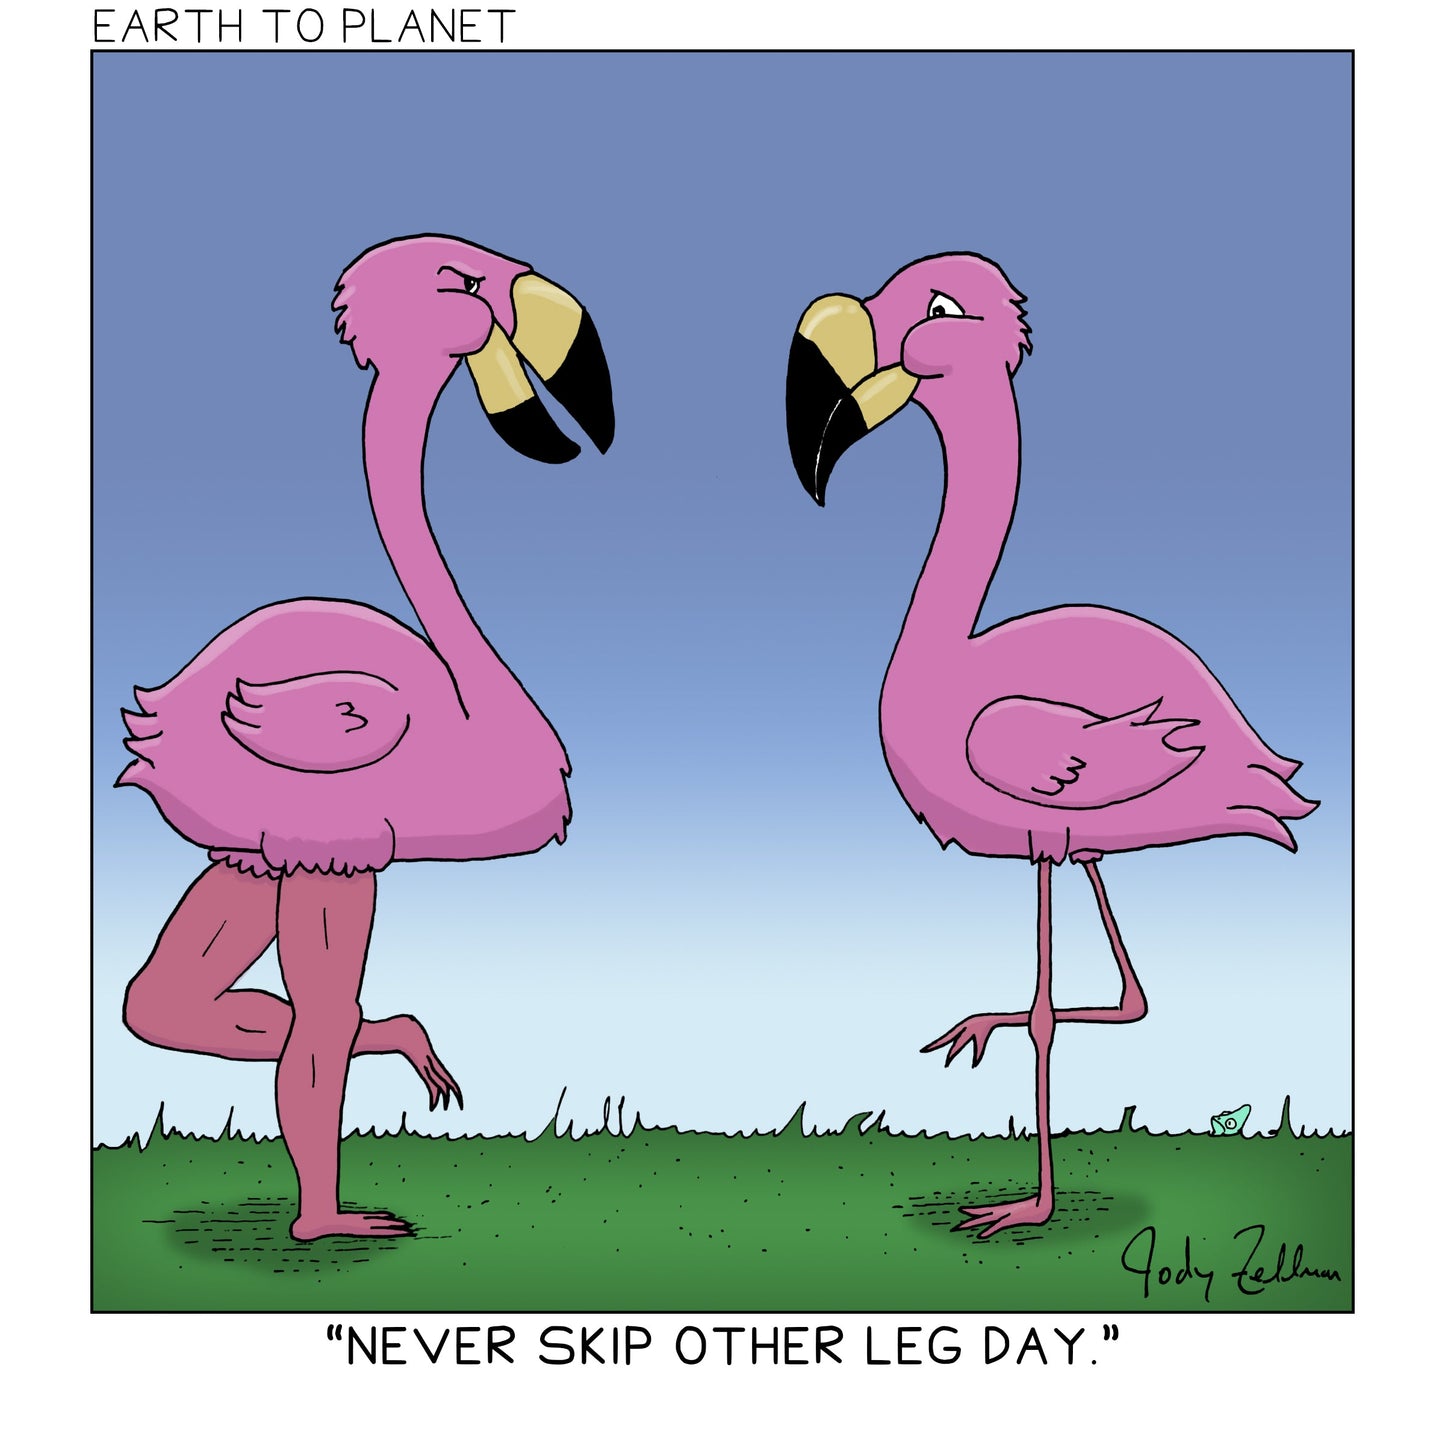 Other Leg Day